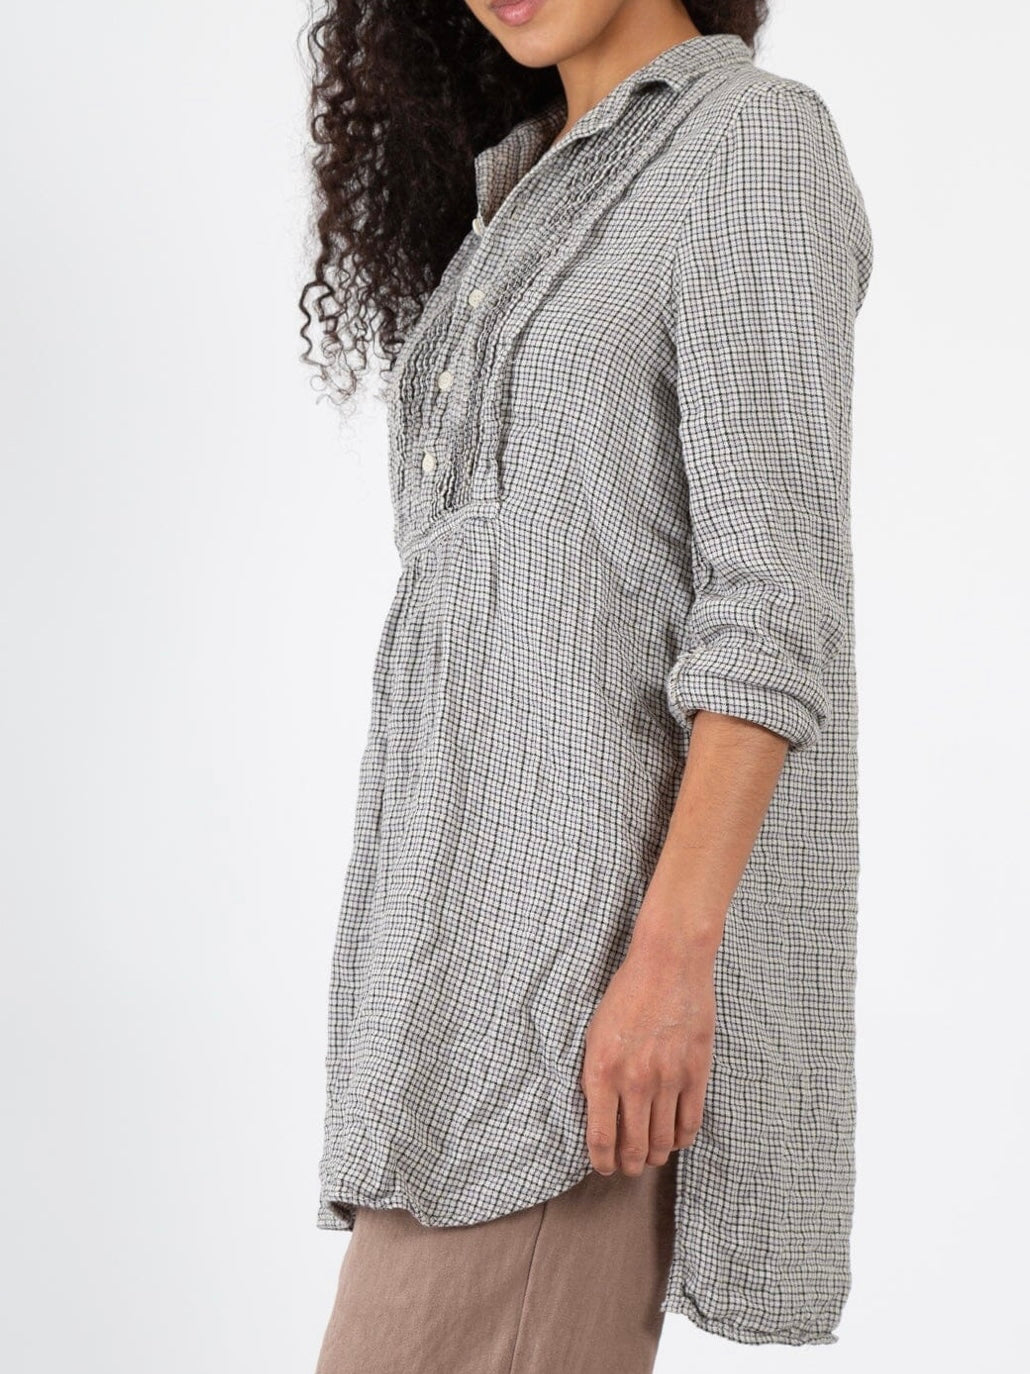 CP Shades Annette Tunic in Double Cotton Gauze Check